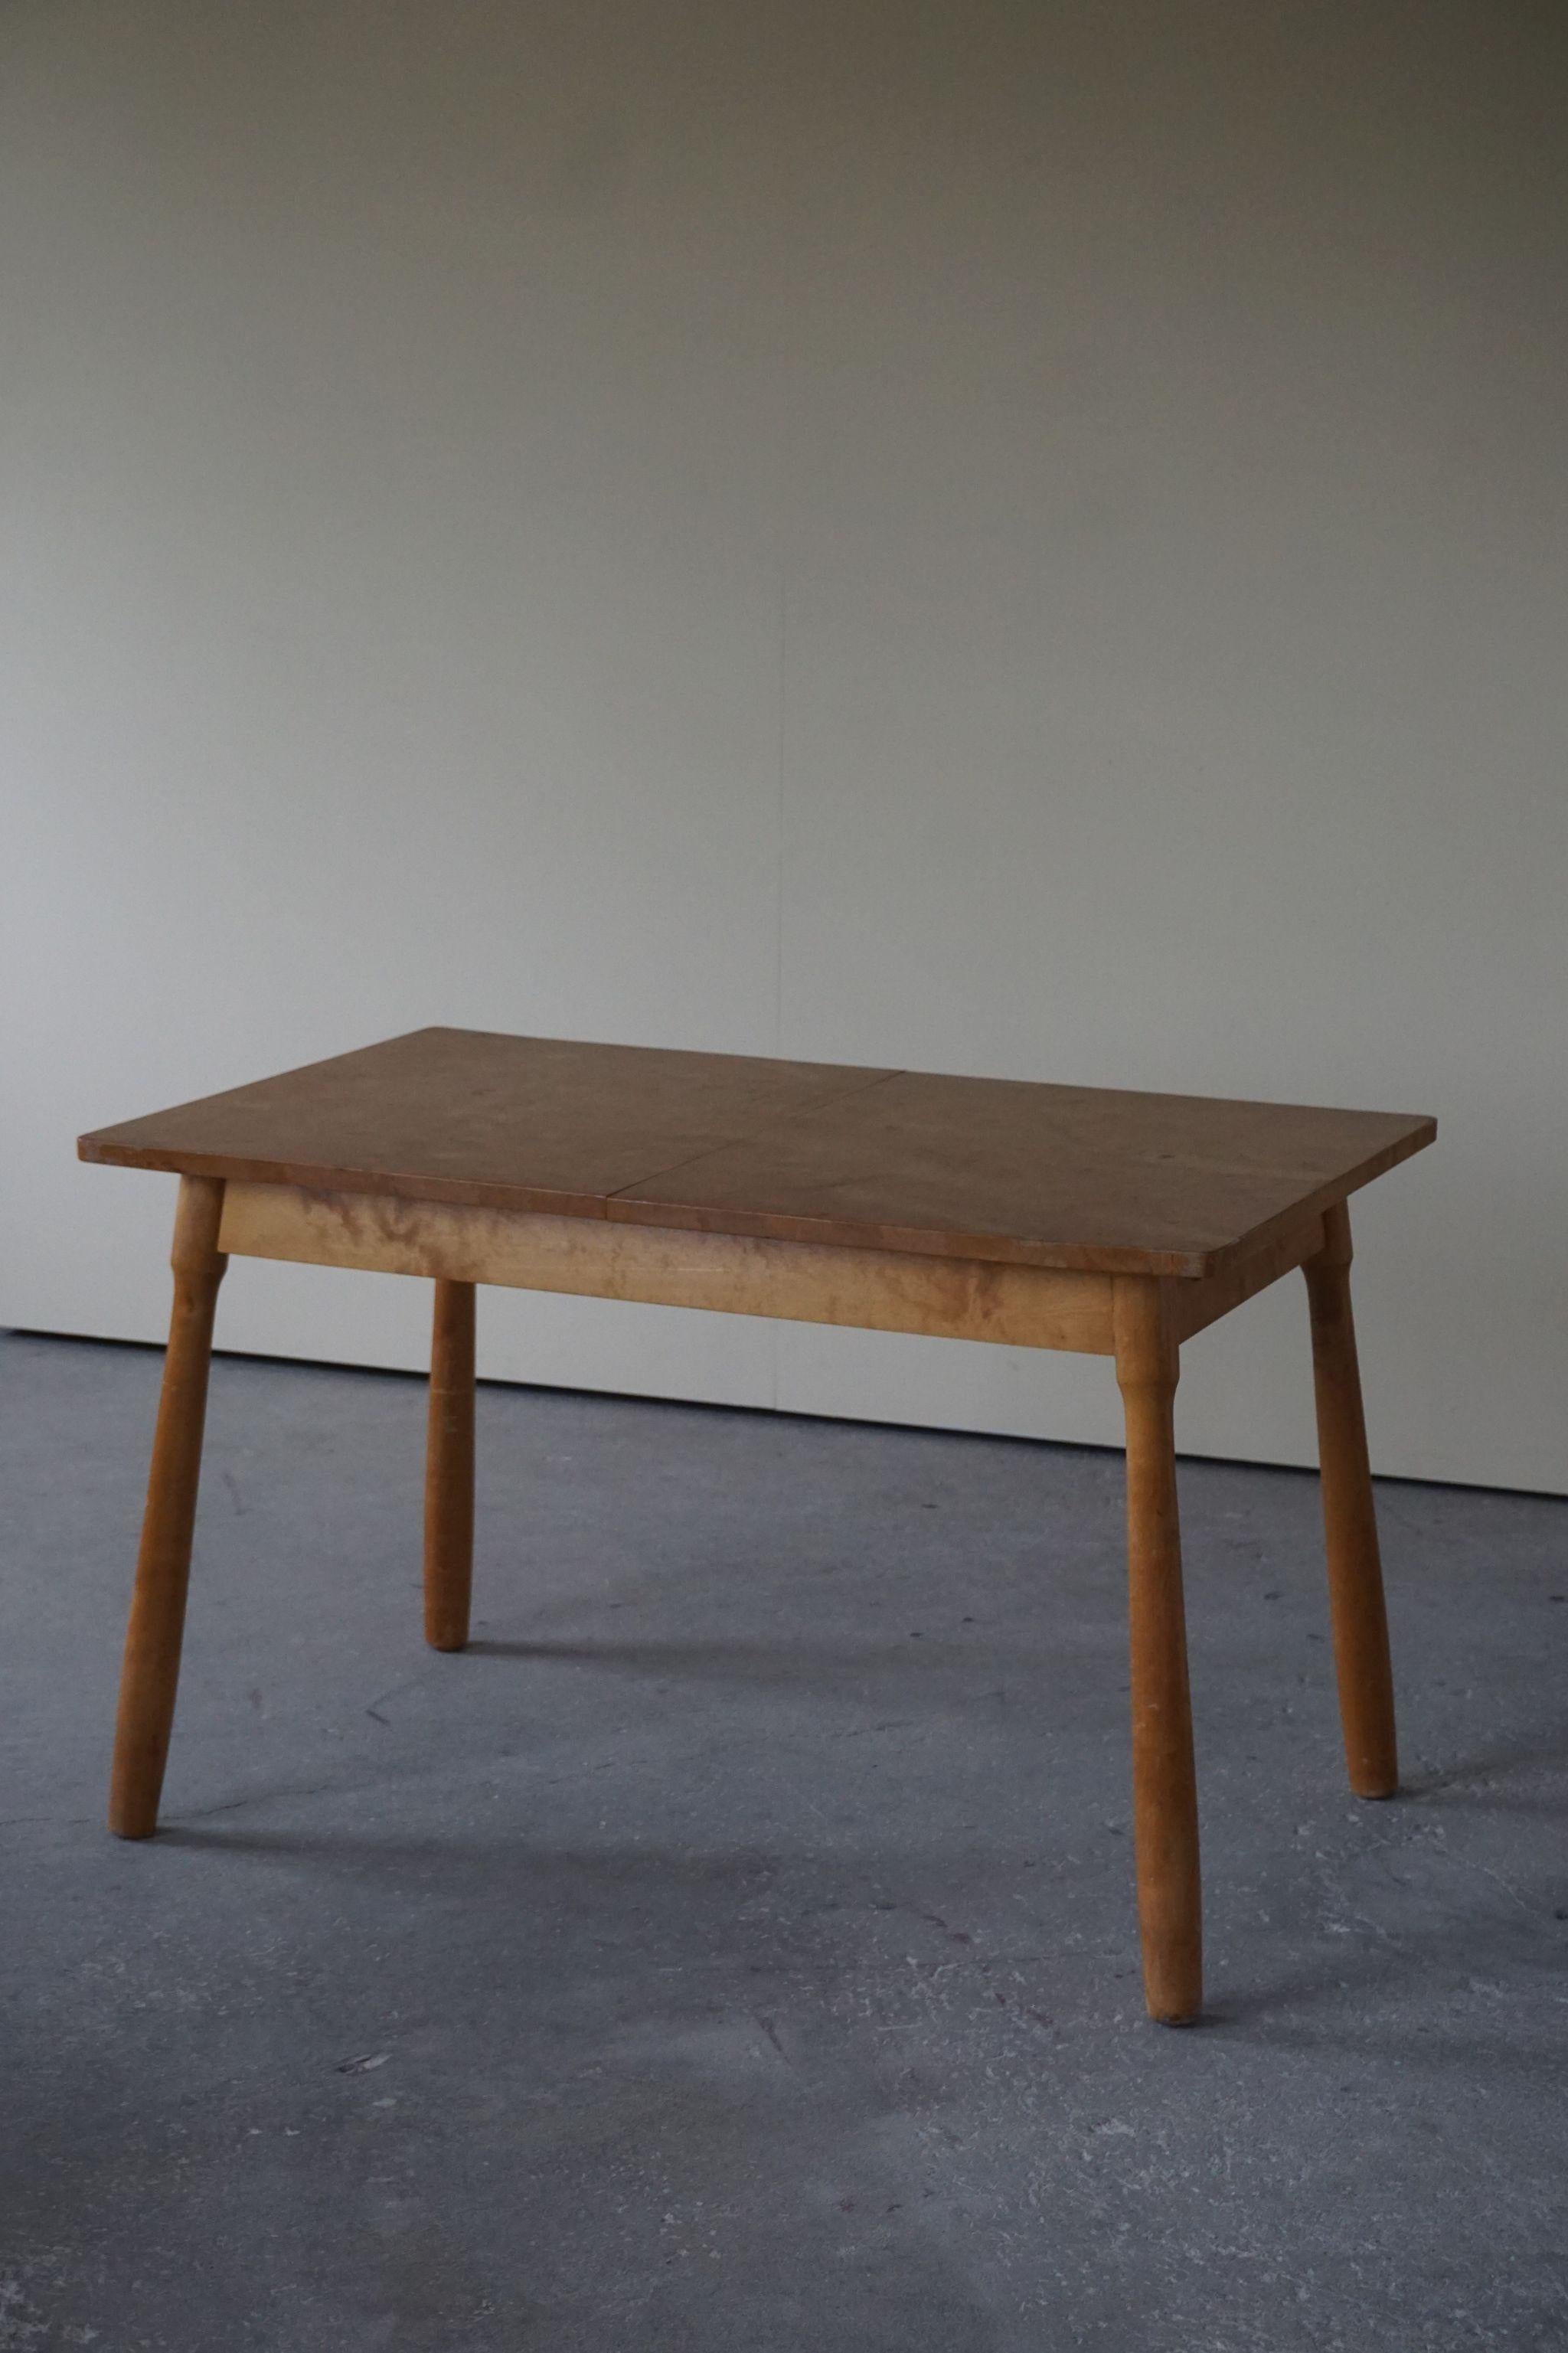 Scandinavian Modern Danish Modern Desk / Dining Table in Birch Attributed to Philip Arctander, 1940s For Sale